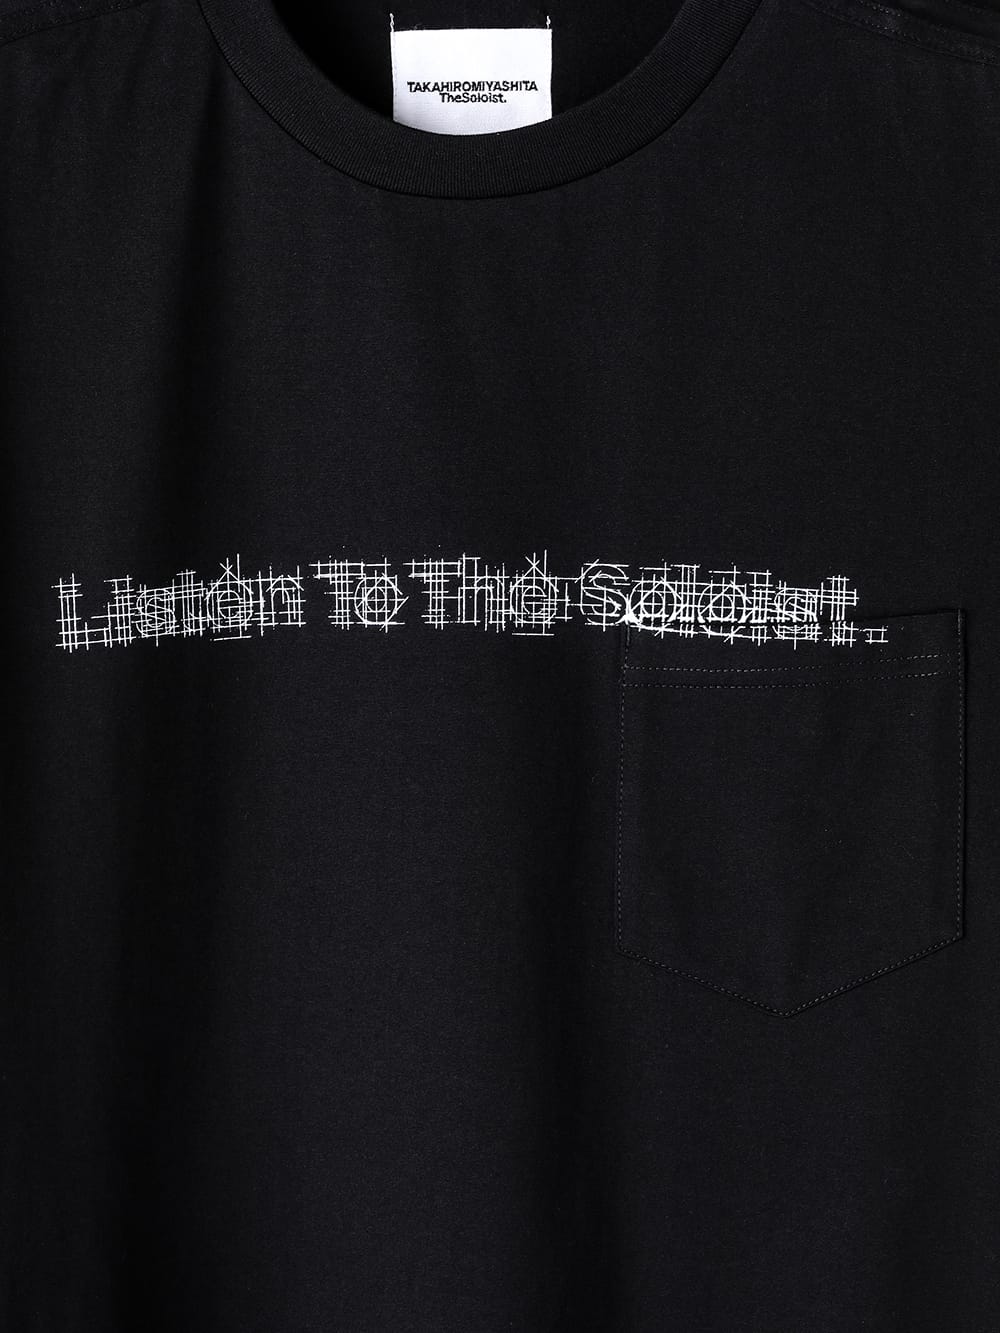 TheSoloist. Sounds. s/s tee